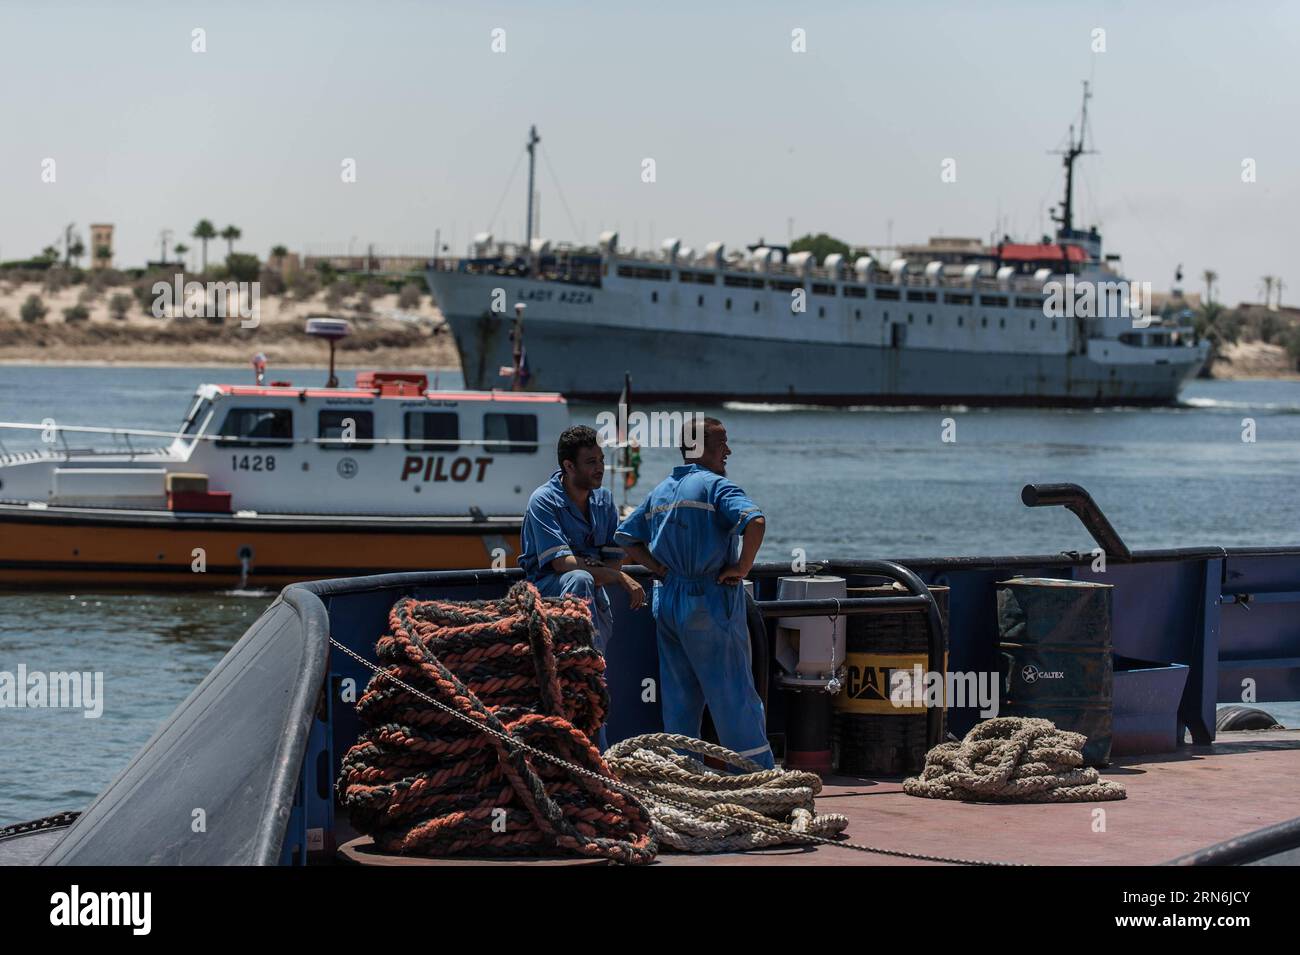 WIRTSCHAFT Ägypten: Neuer Suezkanal fertig gestellt (150729) -- ISMAILIA, July 29, 2015 -- Egyptian crew members of a boat are seen prior to their cruise on the new Suez Canal in Ismailia, a port city in Egypt, on July 29, 2015. The dredging work of Egypt s New Suez Canal has been completed and the waterway is ready as well as safe for huge ship navigation, Mohab Memish, head of the Suez Canal Authority (SCA), told reporters in a press conference Wednesday. ) EGYPT-ISMAILIA-NEW SUEZ CANAL PanxChaoyue PUBLICATIONxNOTxINxCHN   Economy Egypt later Suez Canal ready asked 150729 Ismailia July 29 20 Stock Photo